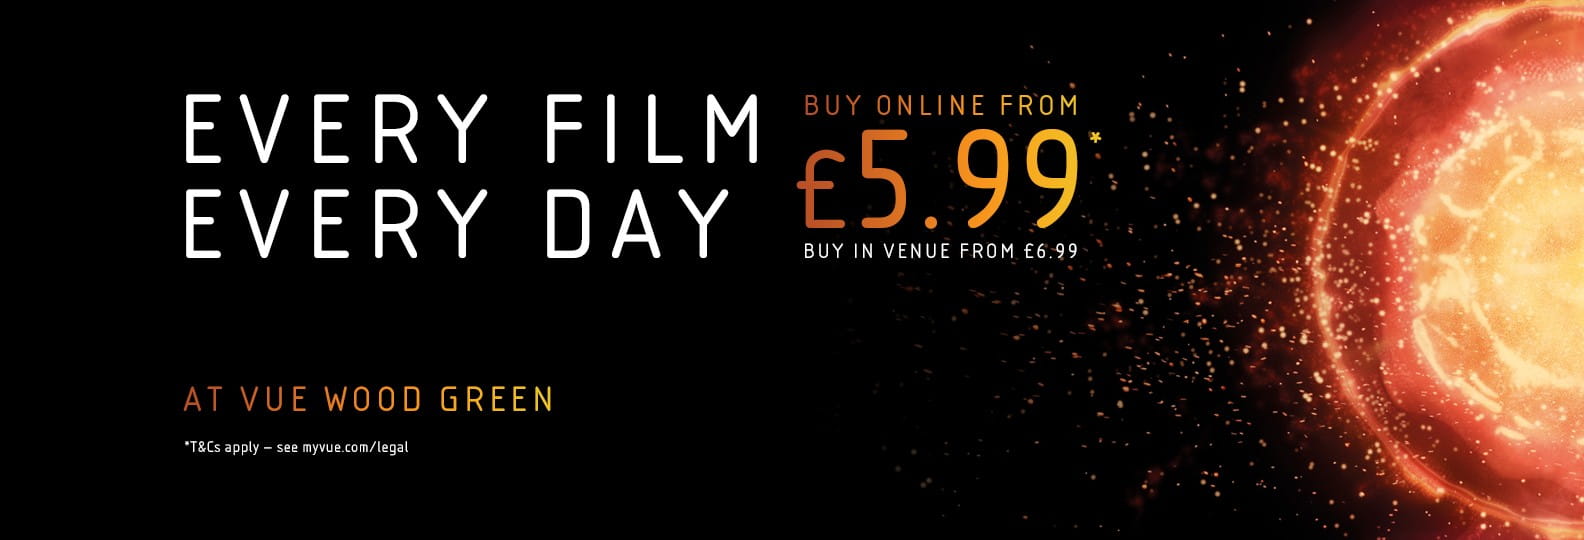 Every Film, Every Day, Every Screening from £5.99 at Vue Wood Green